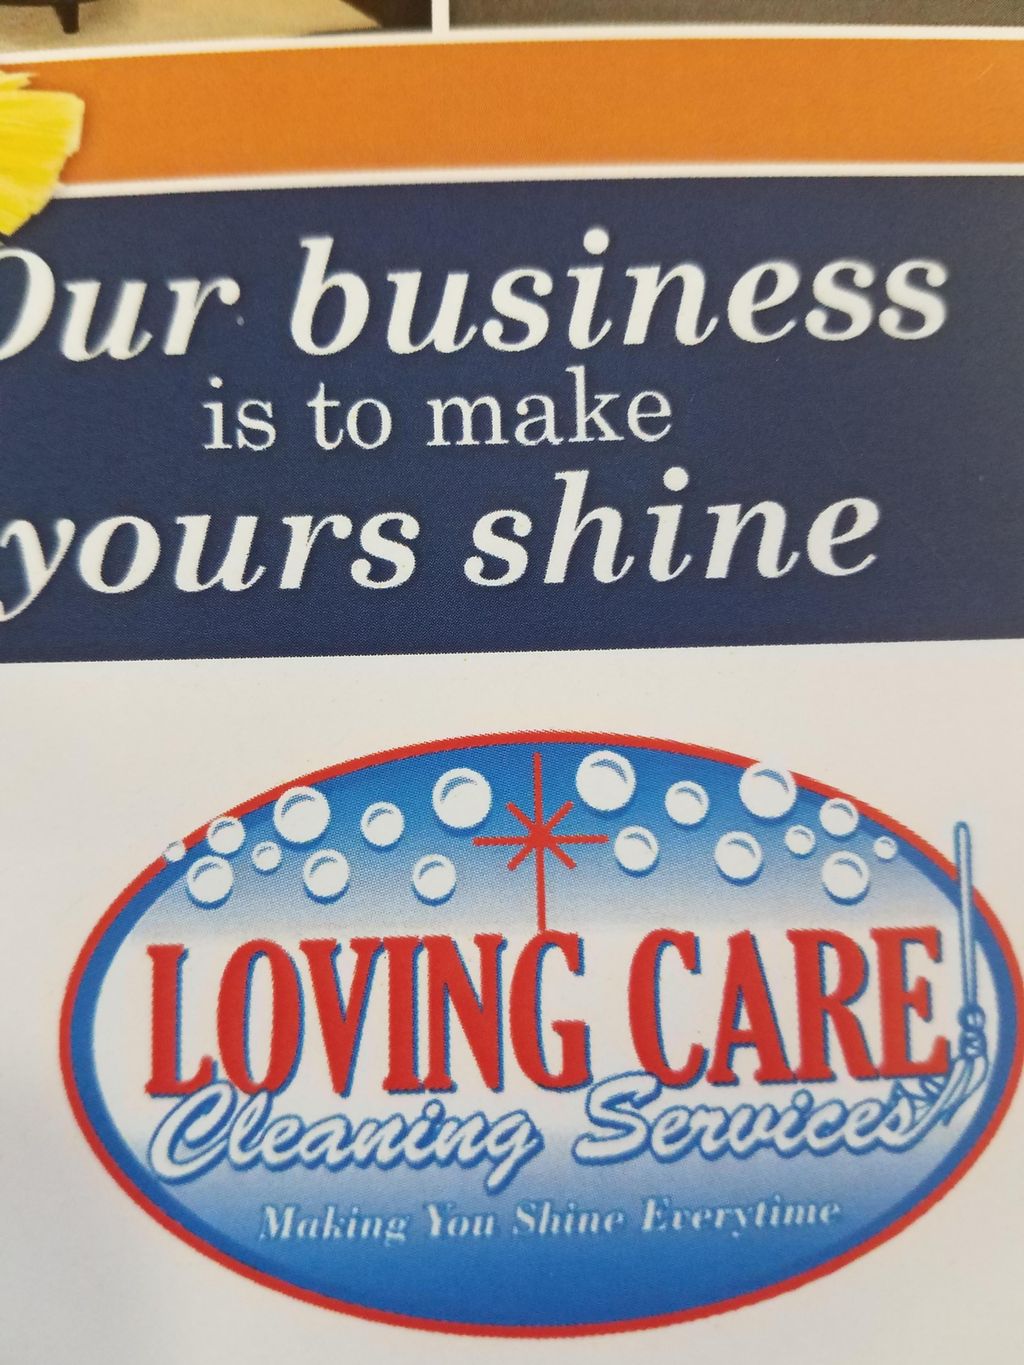 Loving Care Cleaning Service